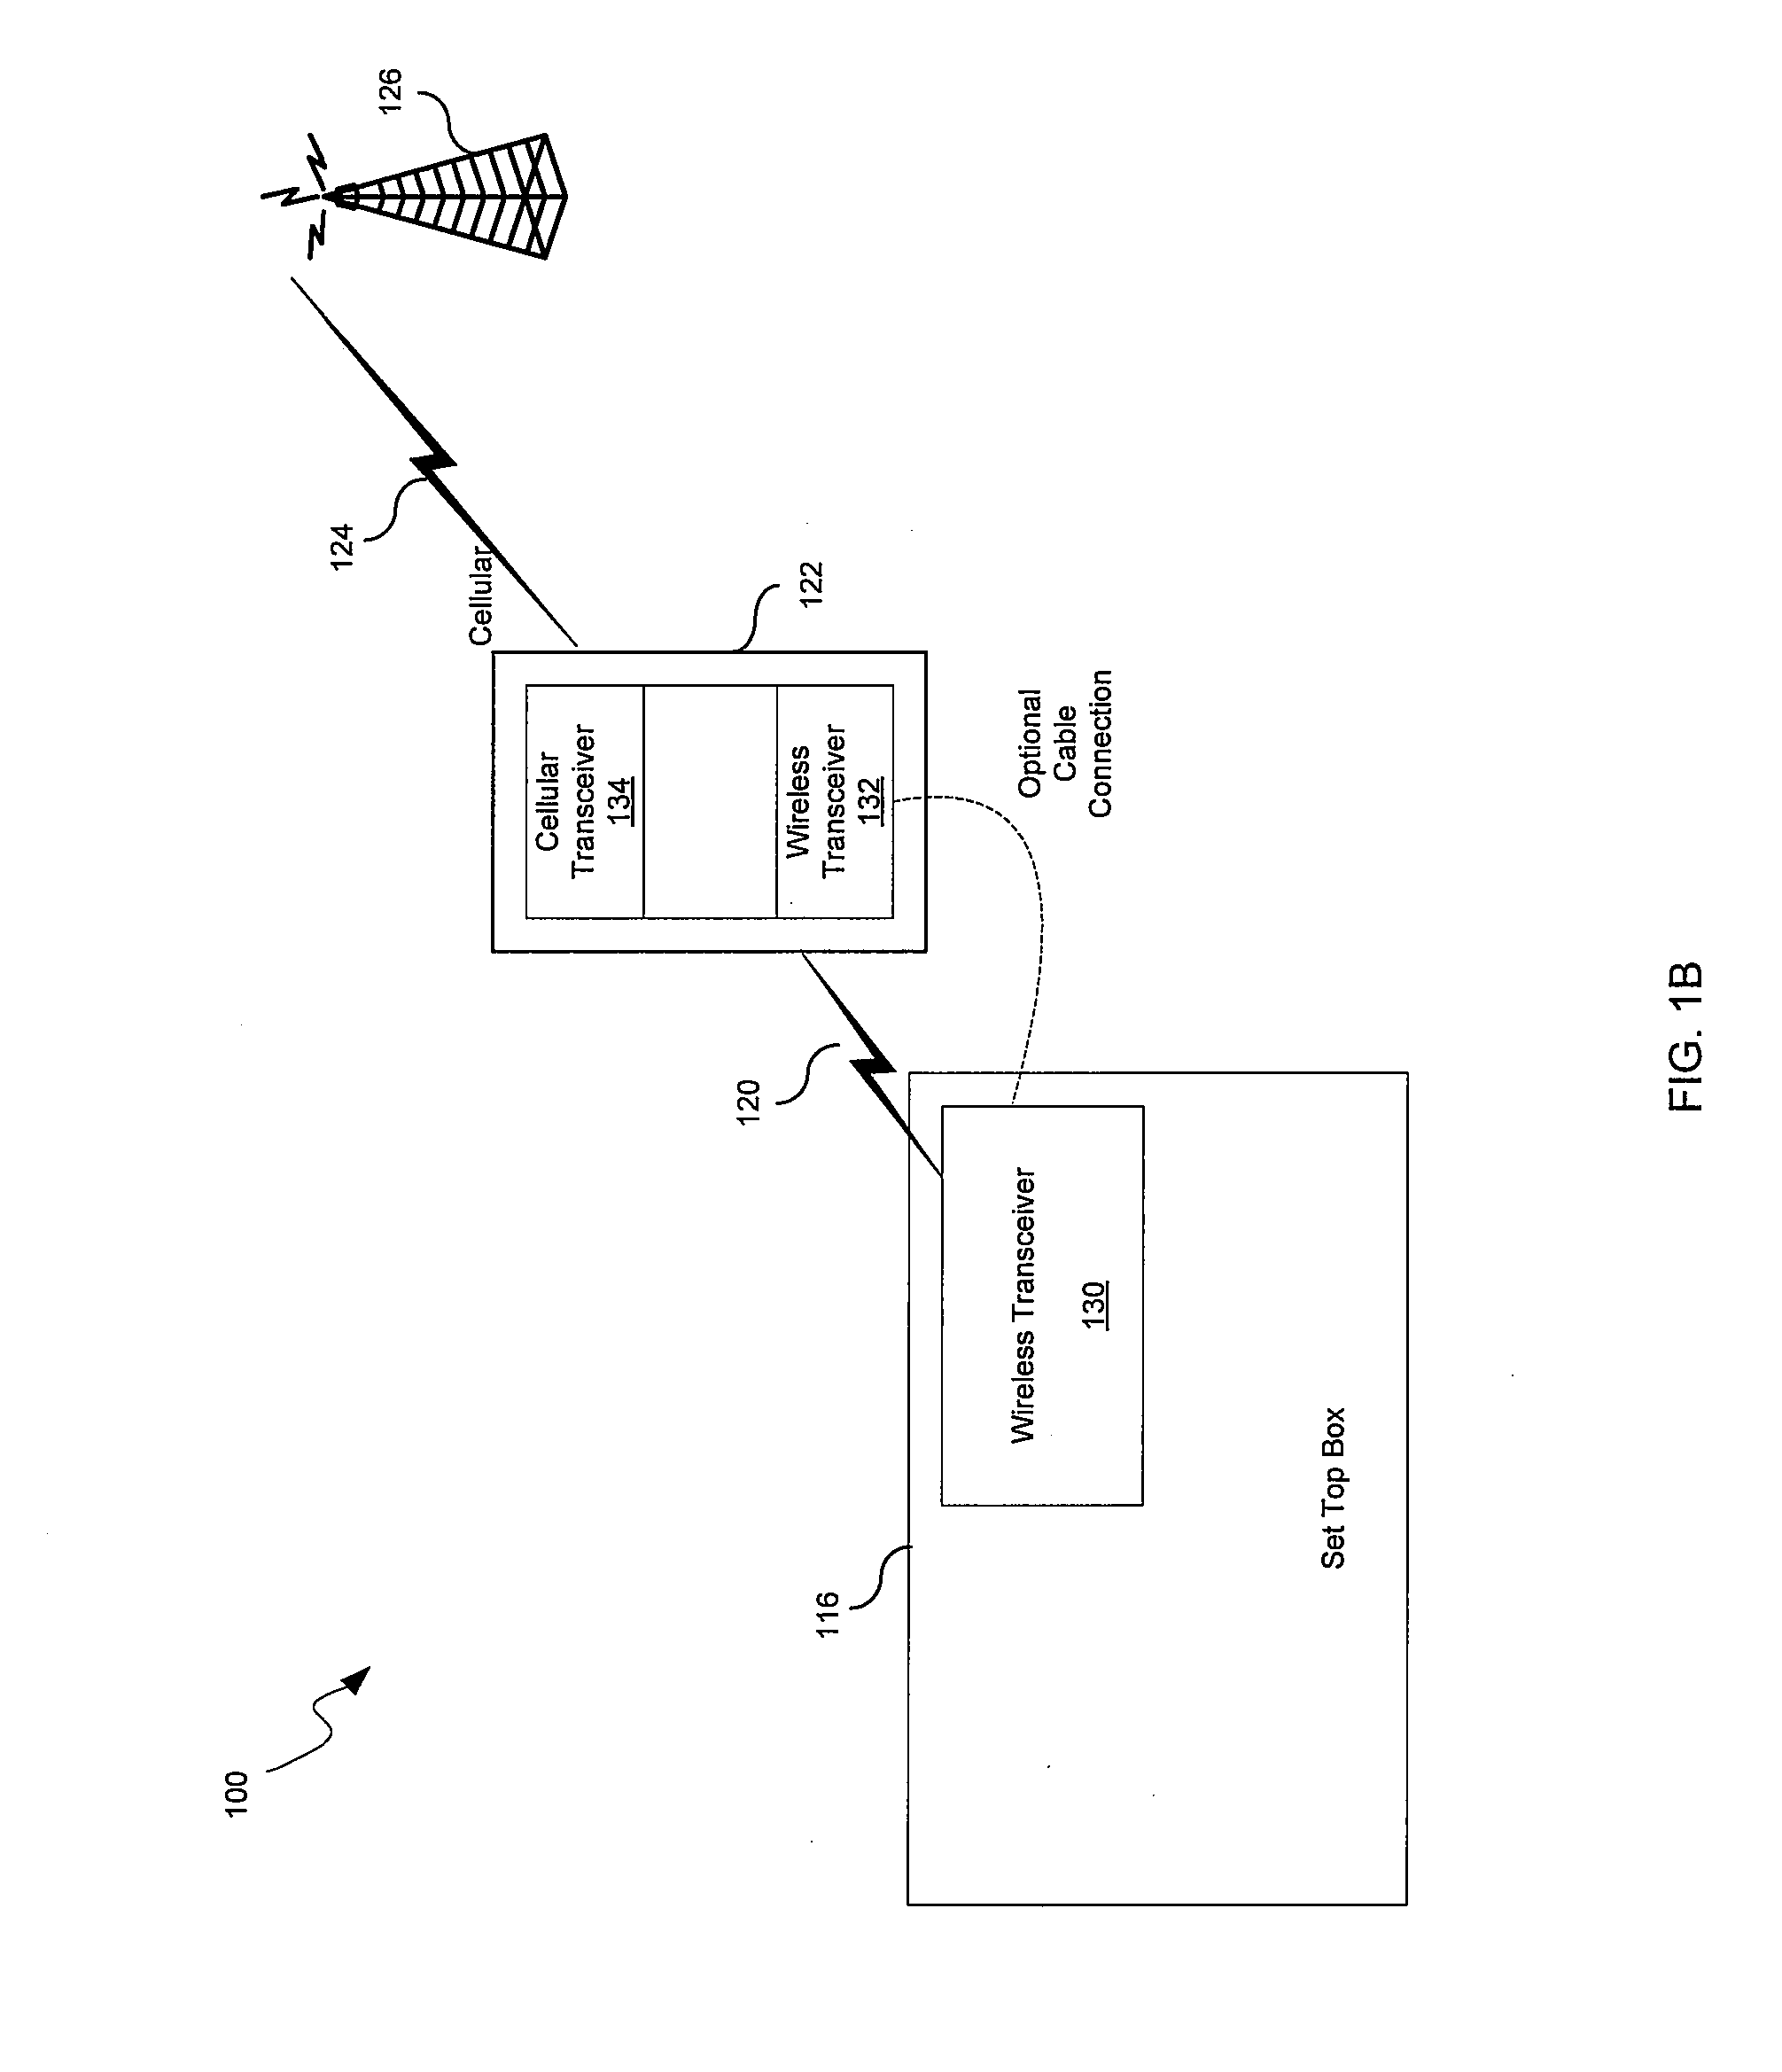 Method And System For Back Channel Communication Utilizing DTMF For Set Top Box Devices